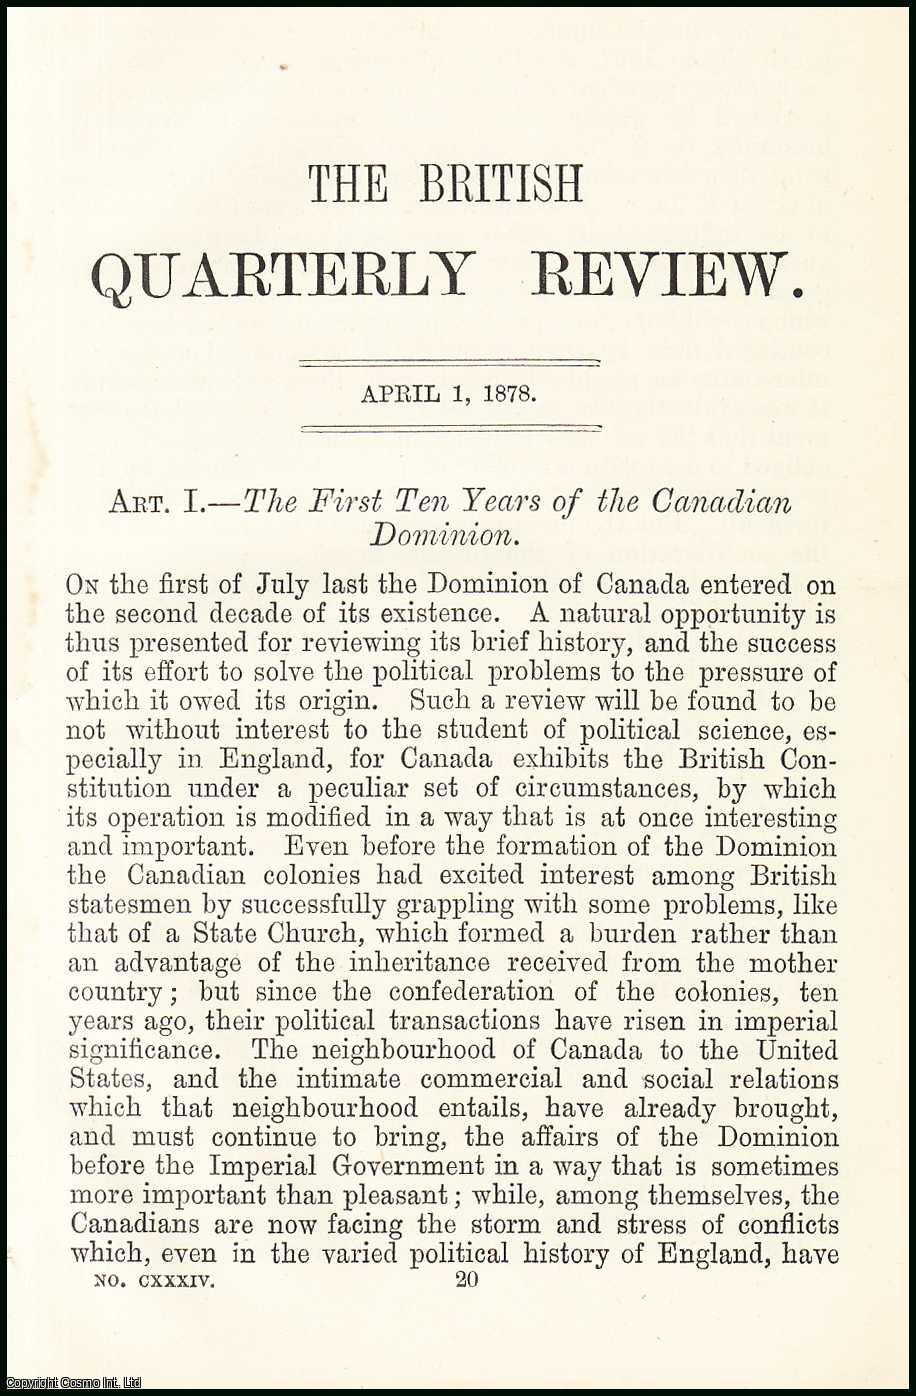 Author Unknown - The First Ten Years of the Canadian Dominion. A rare original article from the British Quarterly Review, 1878.